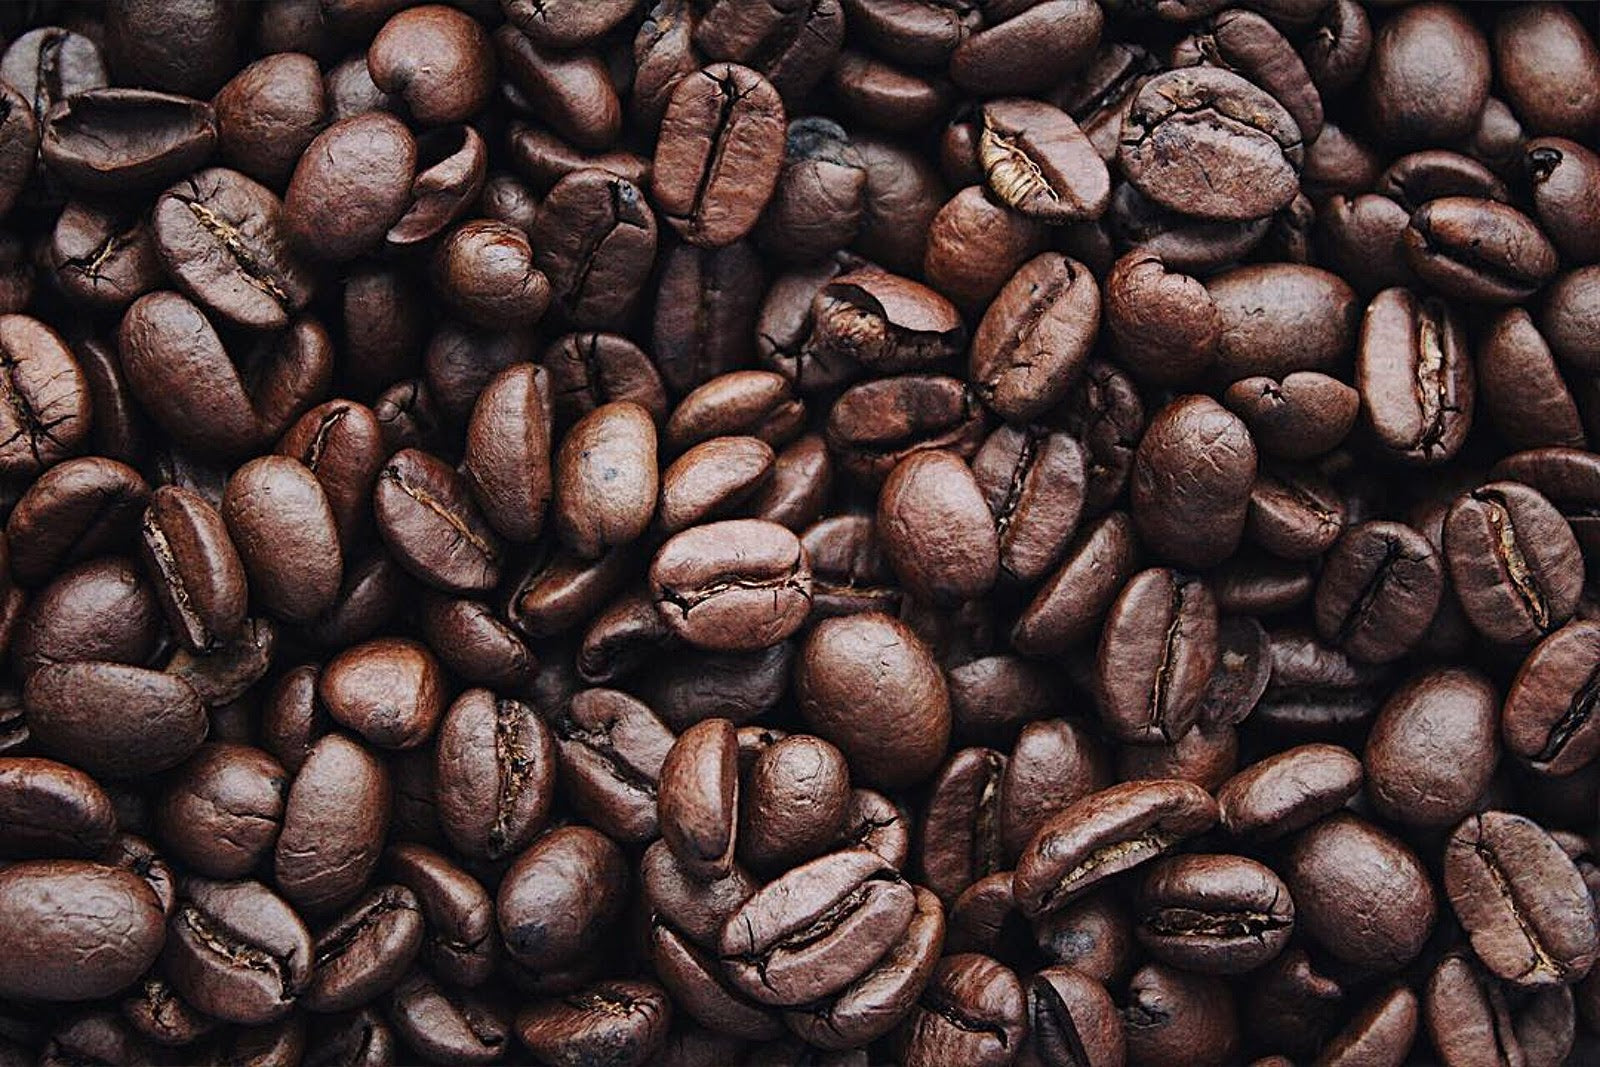 Roasted Coffee beans.